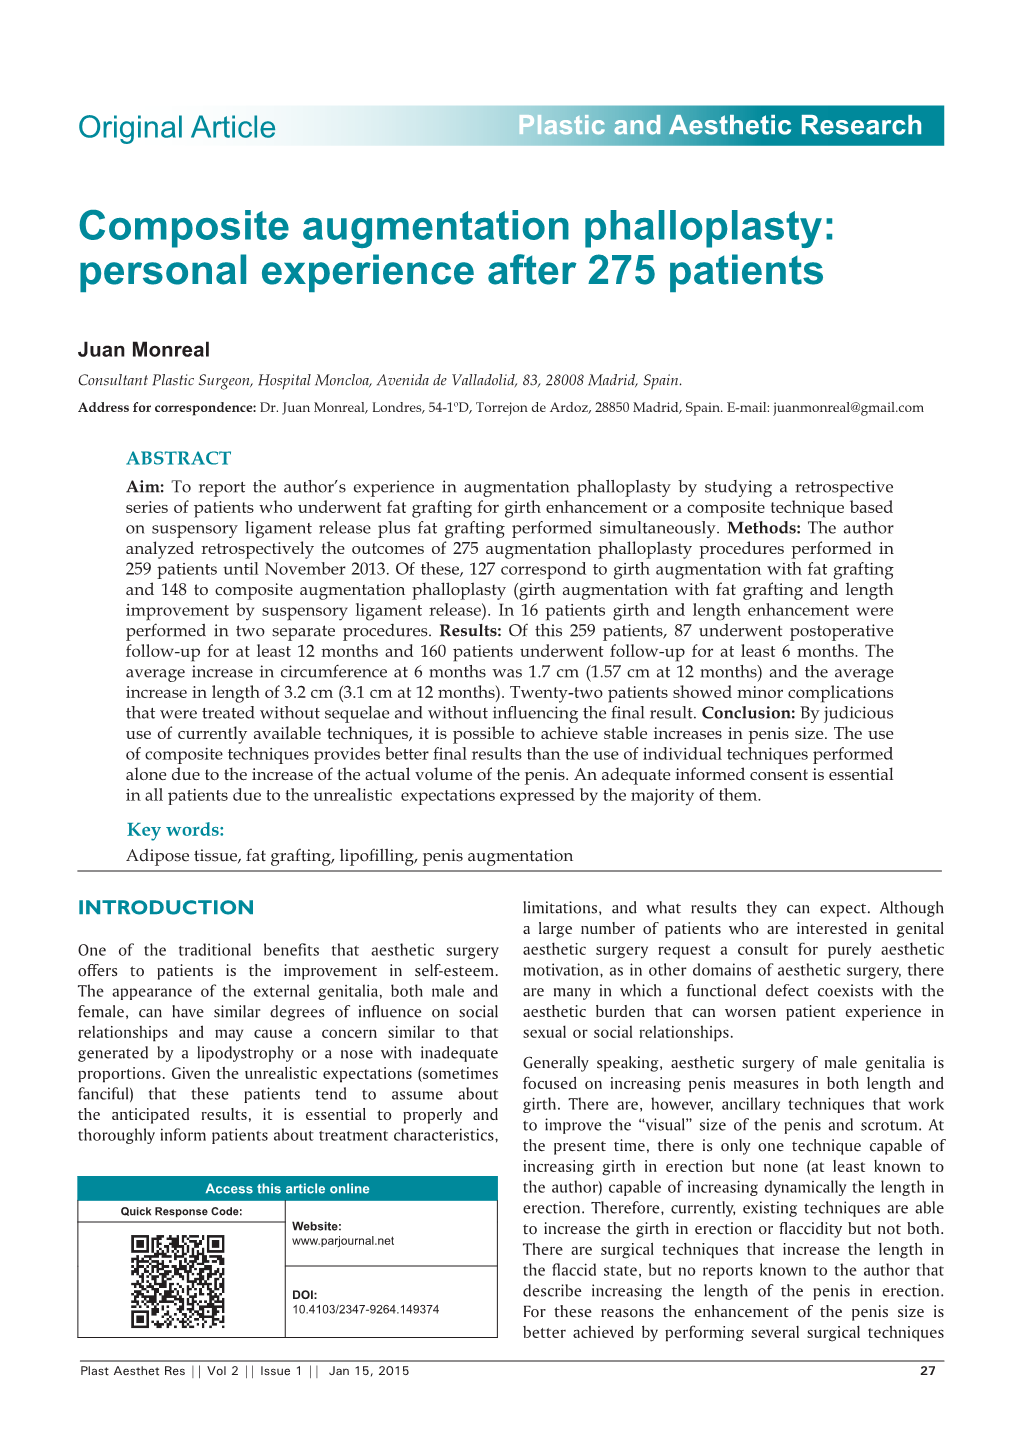 Composite Augmentation Phalloplasty: Personal Experience After 275 Patients